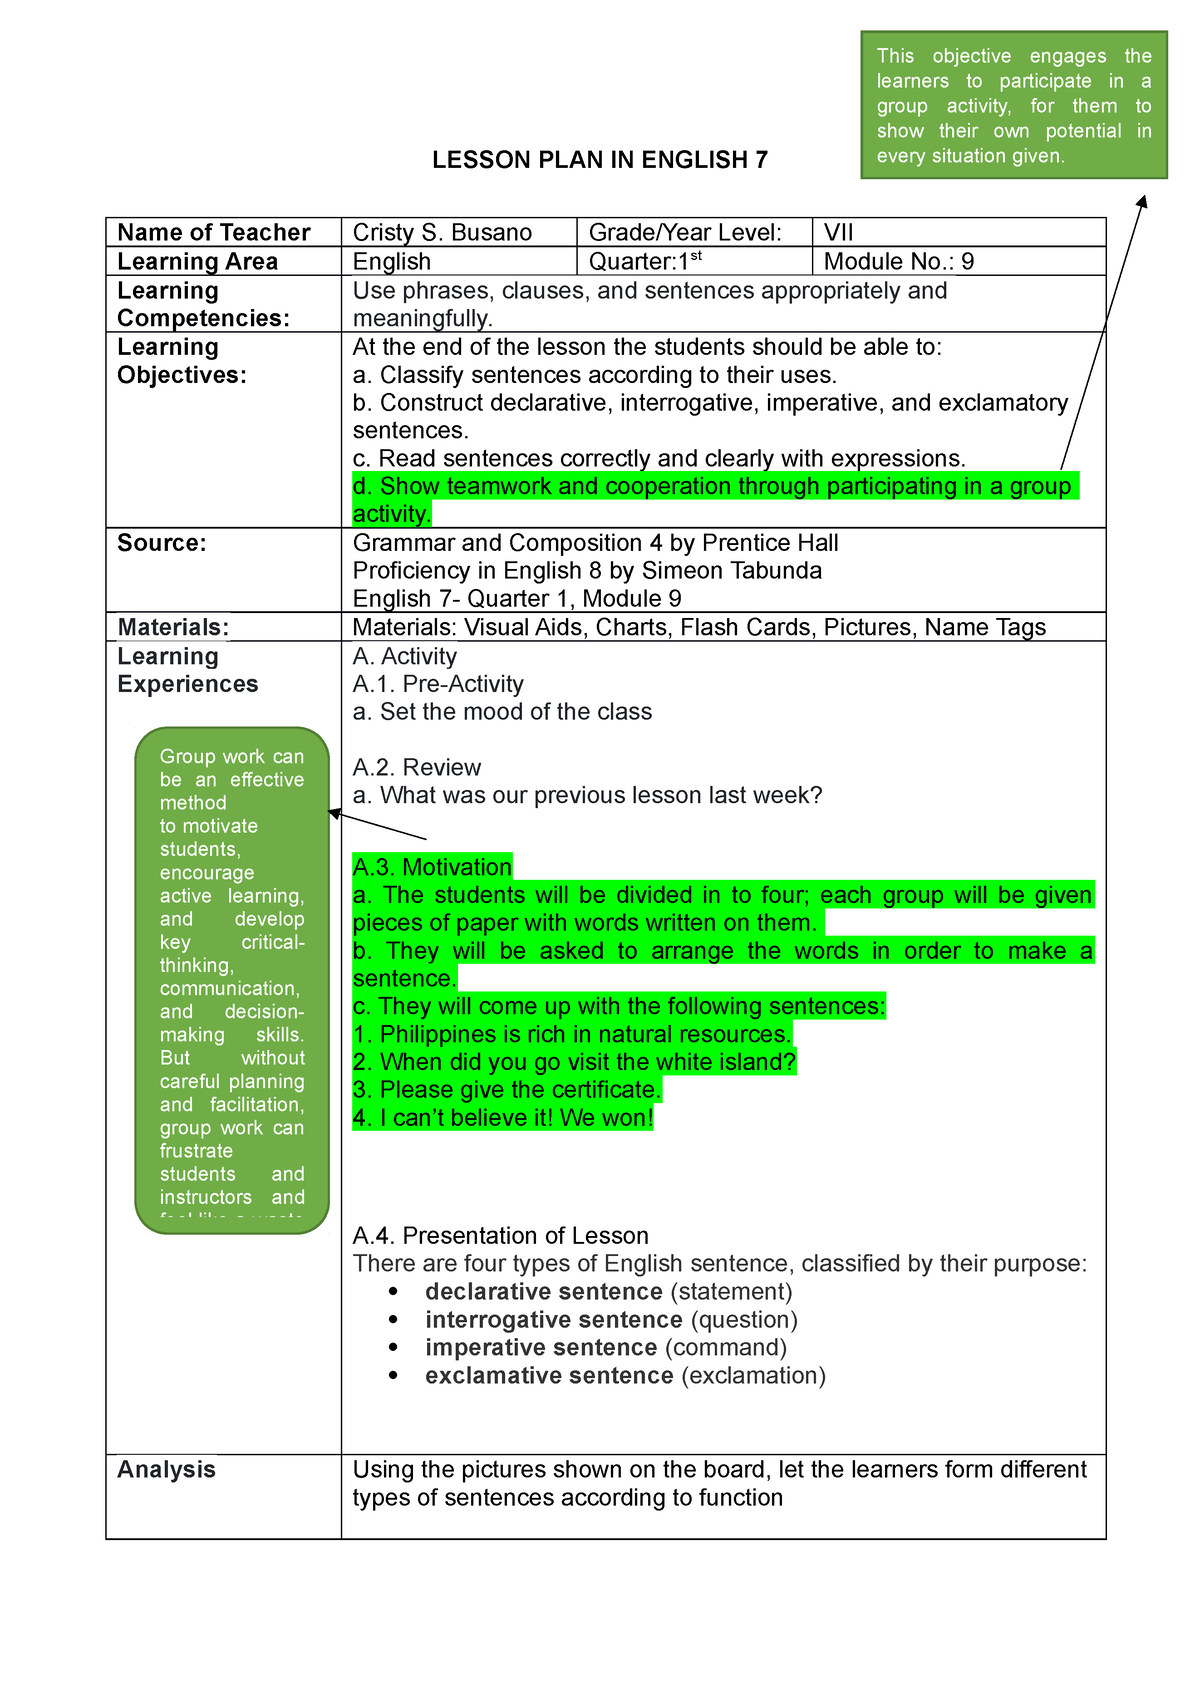 lesson-plan-in-english-7-4-types-of-sentences-lesson-plan-in-english-7-name-of-teacher-cristy